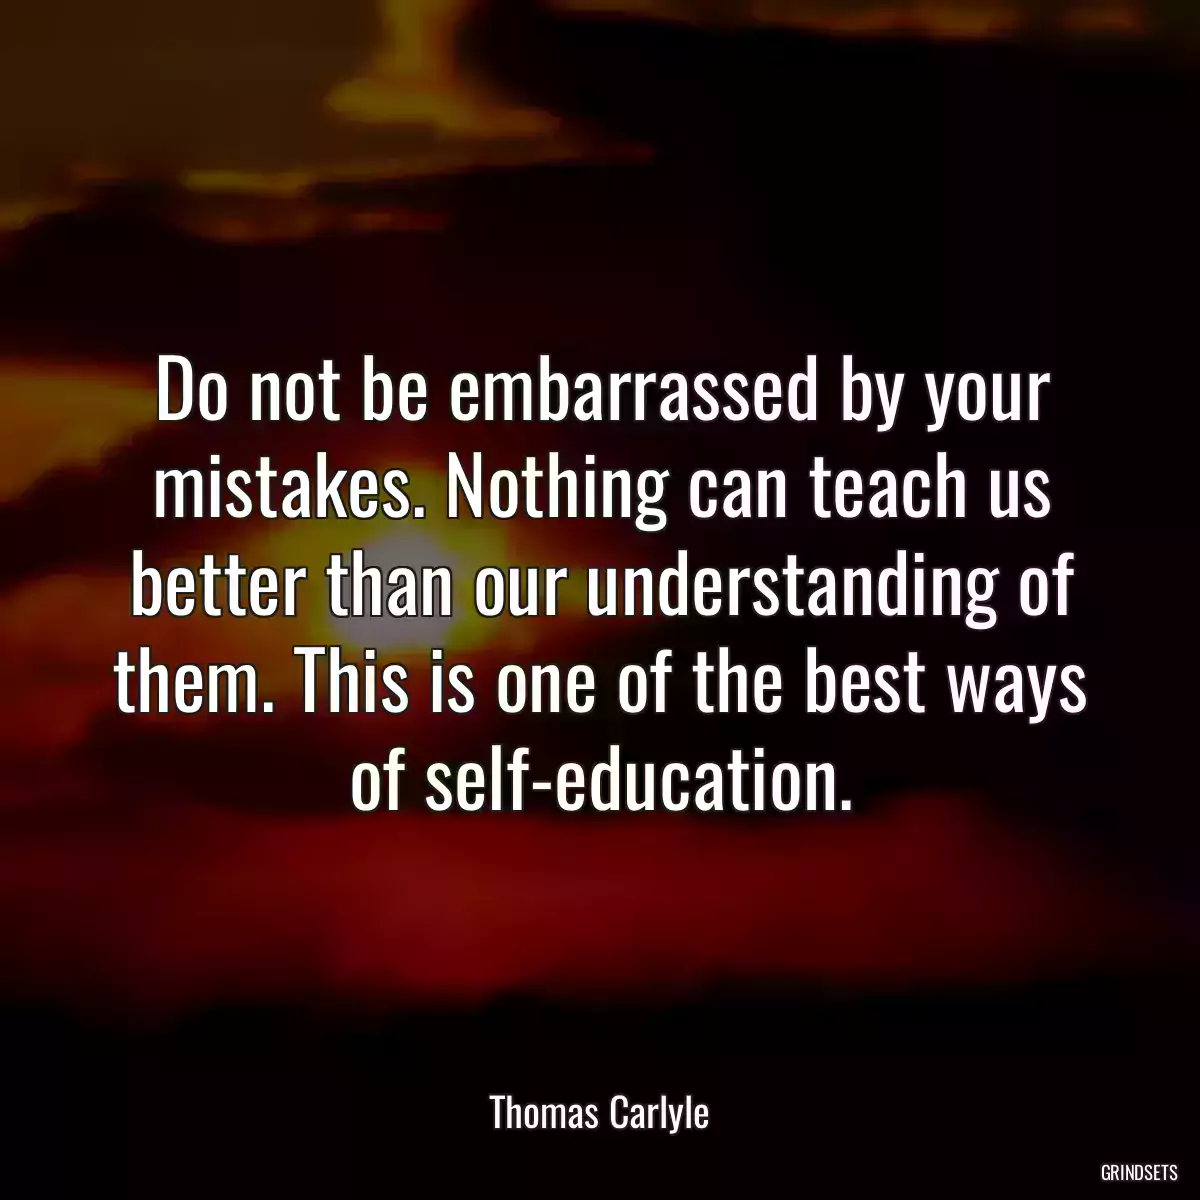 Do not be embarrassed by your mistakes. Nothing can teach us better than our understanding of them. This is one of the best ways of self-education.